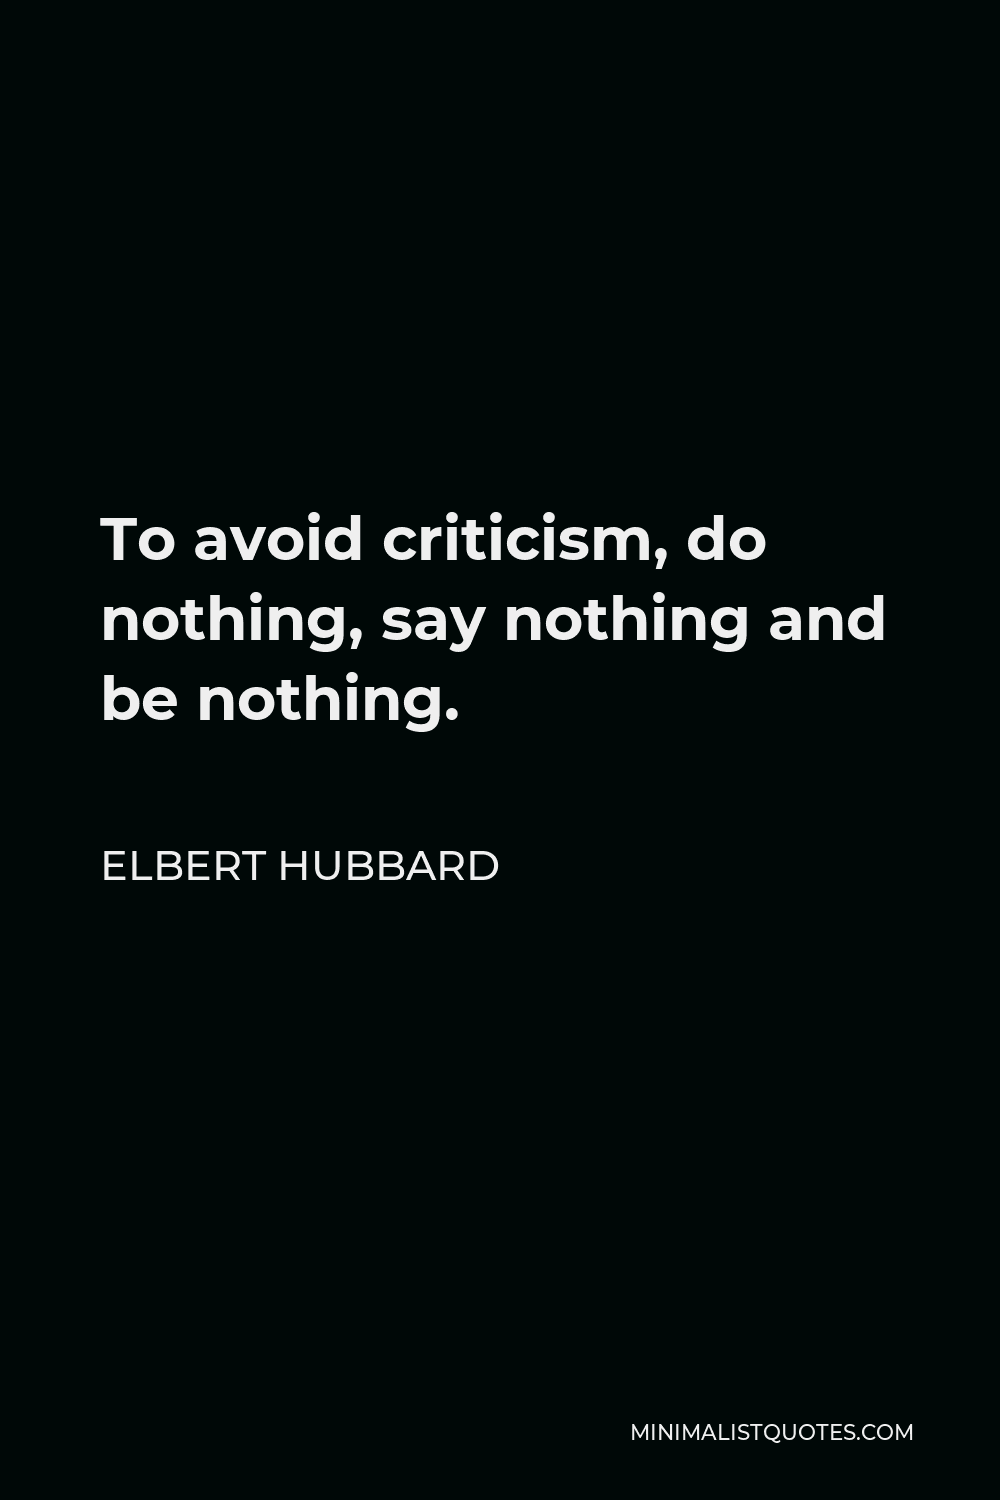 Elbert Hubbard Quote - To avoid criticism, do nothing, say nothing and be nothing.